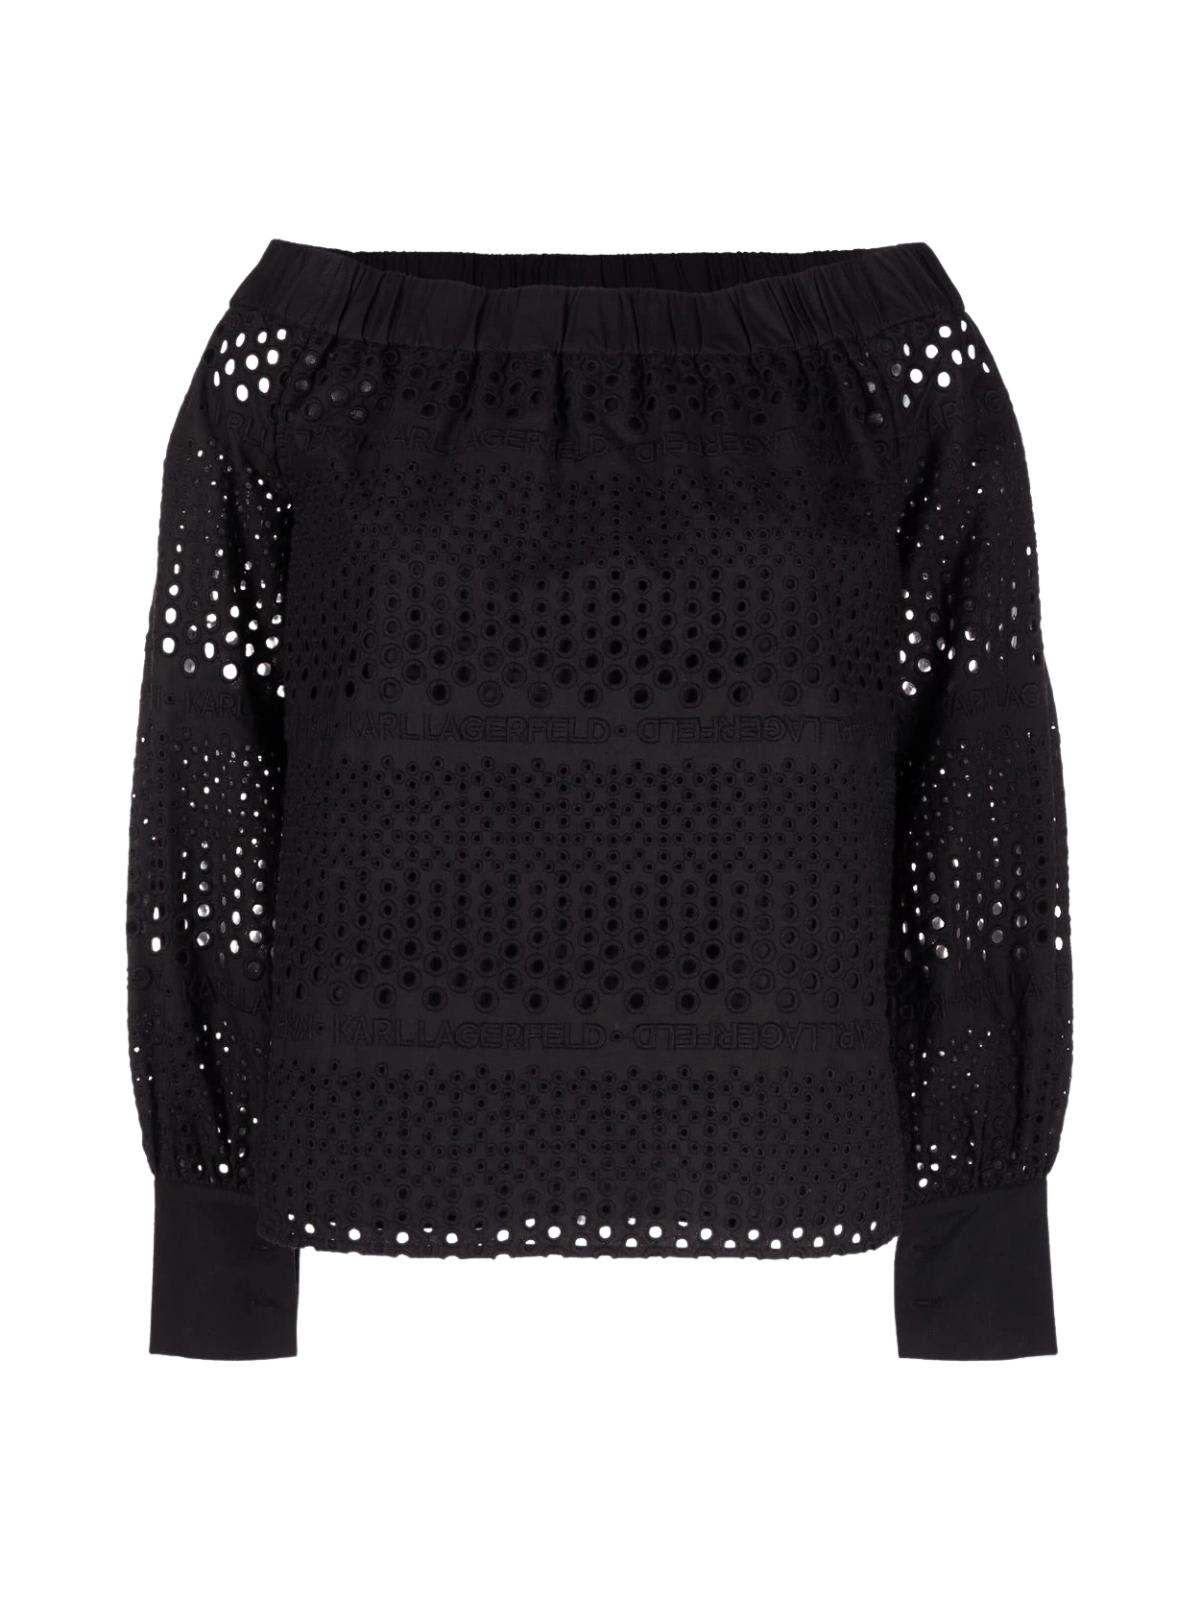 Karl Lagerfeld Broderie Anglaise Top